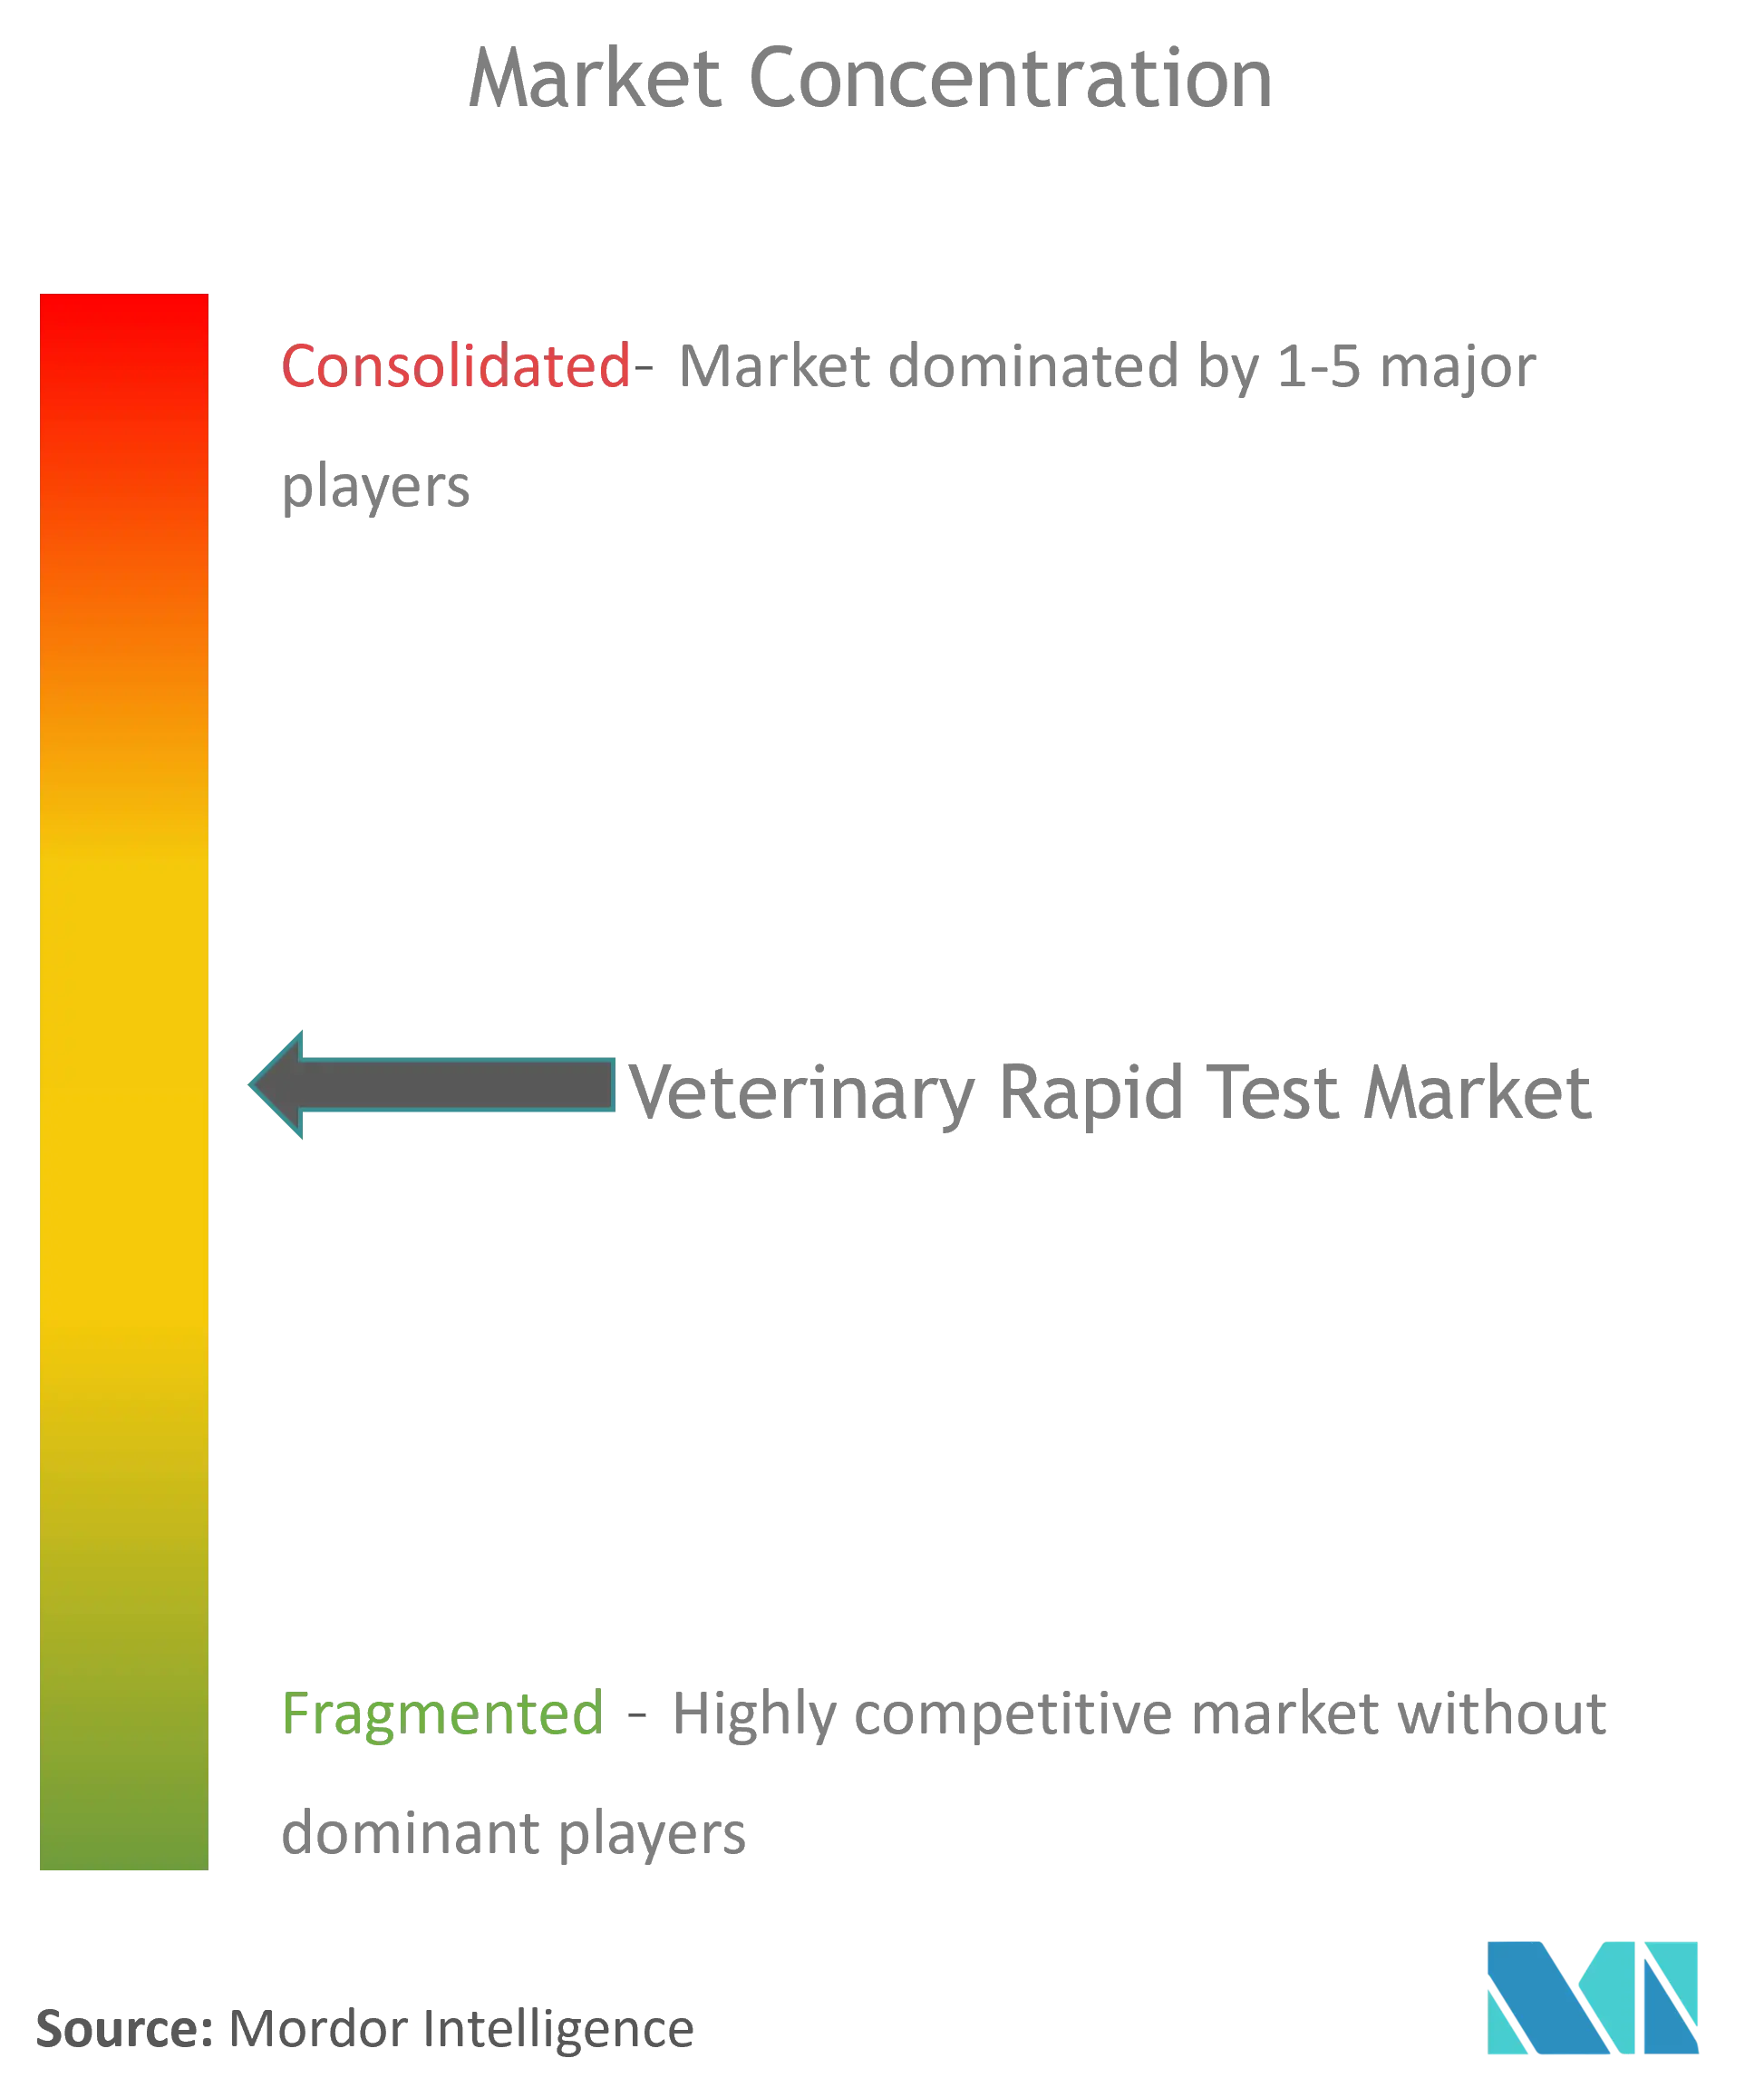 Veterinary Rapid Test Market Concentration